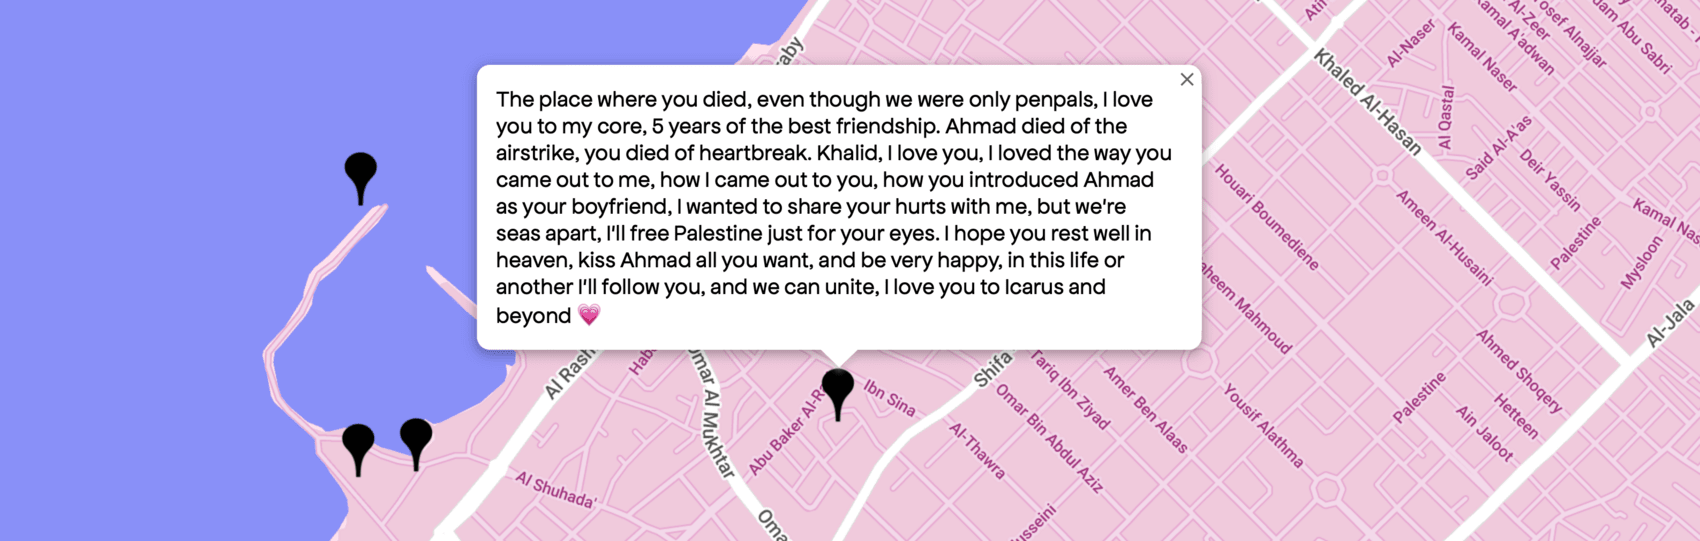 The place where you died, even though we were only penpals, I love you to my core, 5 years of the best friendship. Ahmad died of the airstrike, you died of heartbreak. Khalid, I love you, I loved the way you came out to me, how I came out to you, how you introduced me Ahmad as your boyfriend, I wanted to share your hurts with me, but we're seas apart, I'll free Palestine just for your eyes. I hope you rest well in heaven, kiss Ahmad all you want, and be very happy, in this life or another i'll follow you, and we can unite, I love you to Icarus and beyond